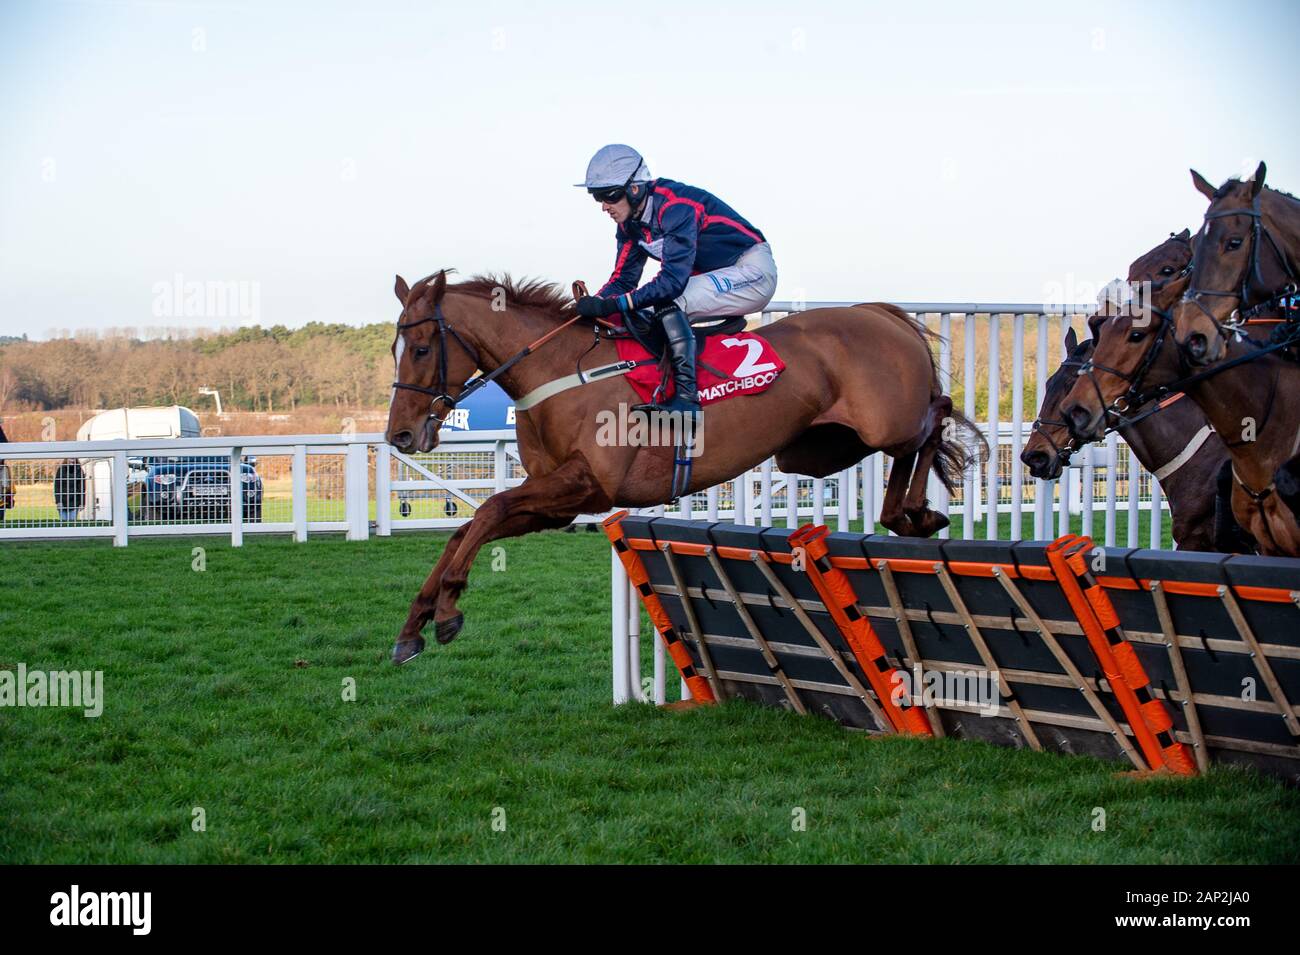 Ascot, Berkshire, UK. 18th Jan, 2020. Ascot, Berkshire, UK. 18th Jan, 2020. Jockey James Nixon races on horse Song for Someone in the The Matchbook Holloway’s Handicap Hurdle Race (Class 1). Owner Sir Peter & Lady Gibbings, Trainer Tom Symonds, Hentland, Breeder J Bervoets, Sponsor Simply Stunning Interiors. Credit: Maureen McLean/Alamy Stock Photo